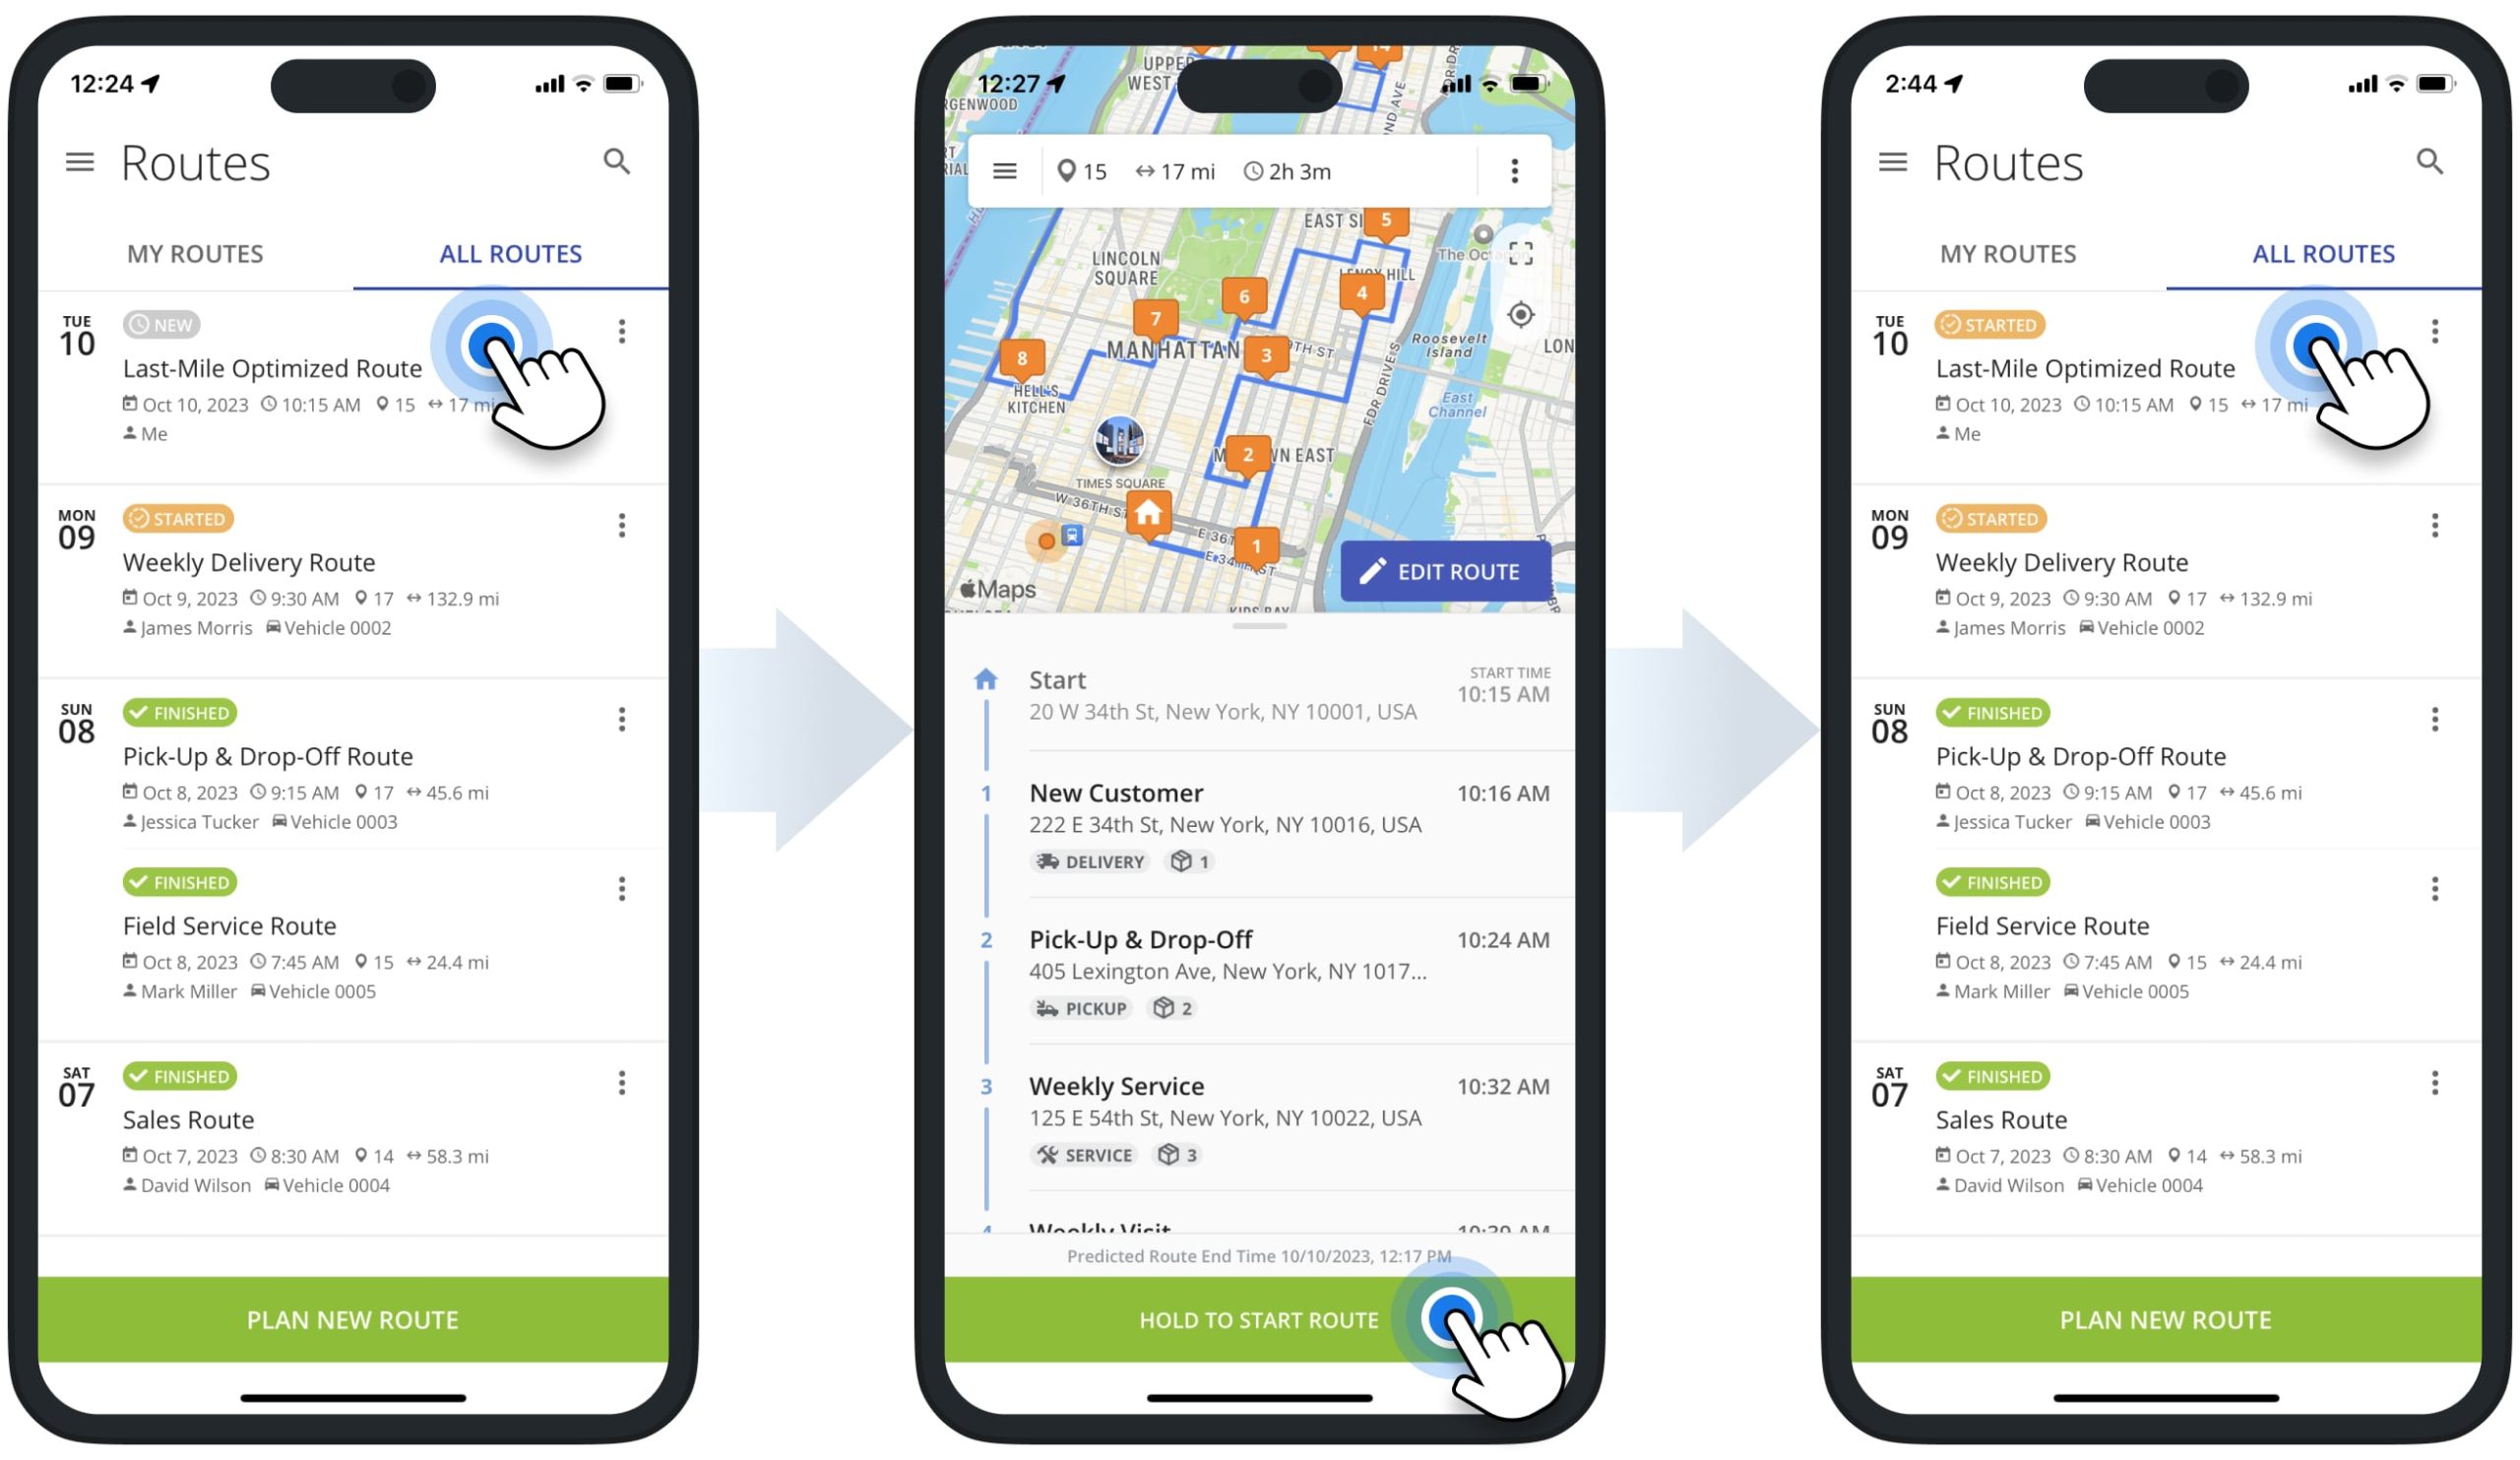 New, Started, and Finished route statuses synchronization in real-time on Route4Me's iPhone Route Planner app for drivers.